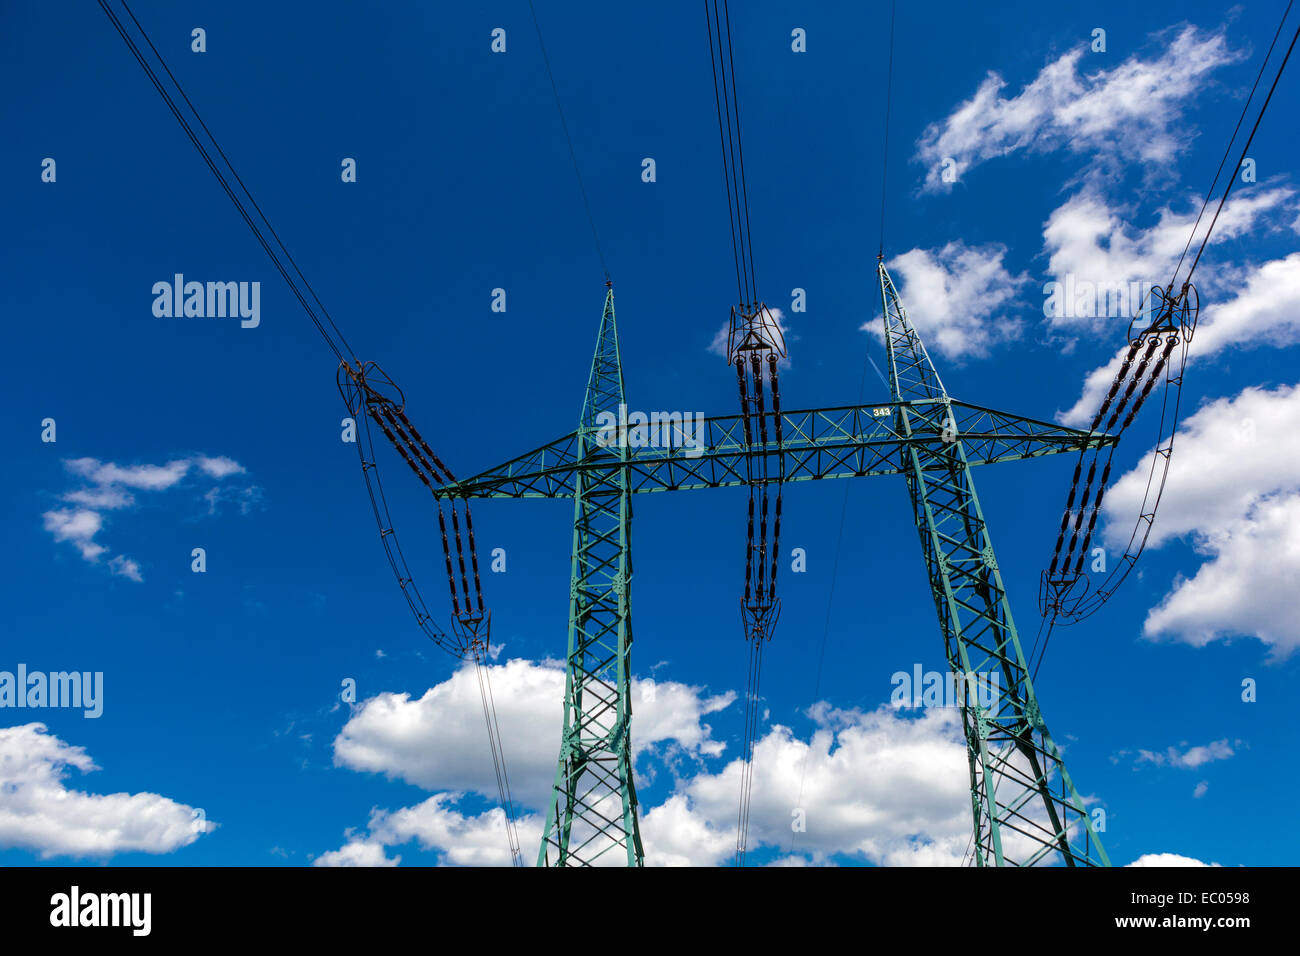 Power lines pylon in blue sky and clouds background, High Voltage mast wires in sky Stock Photo